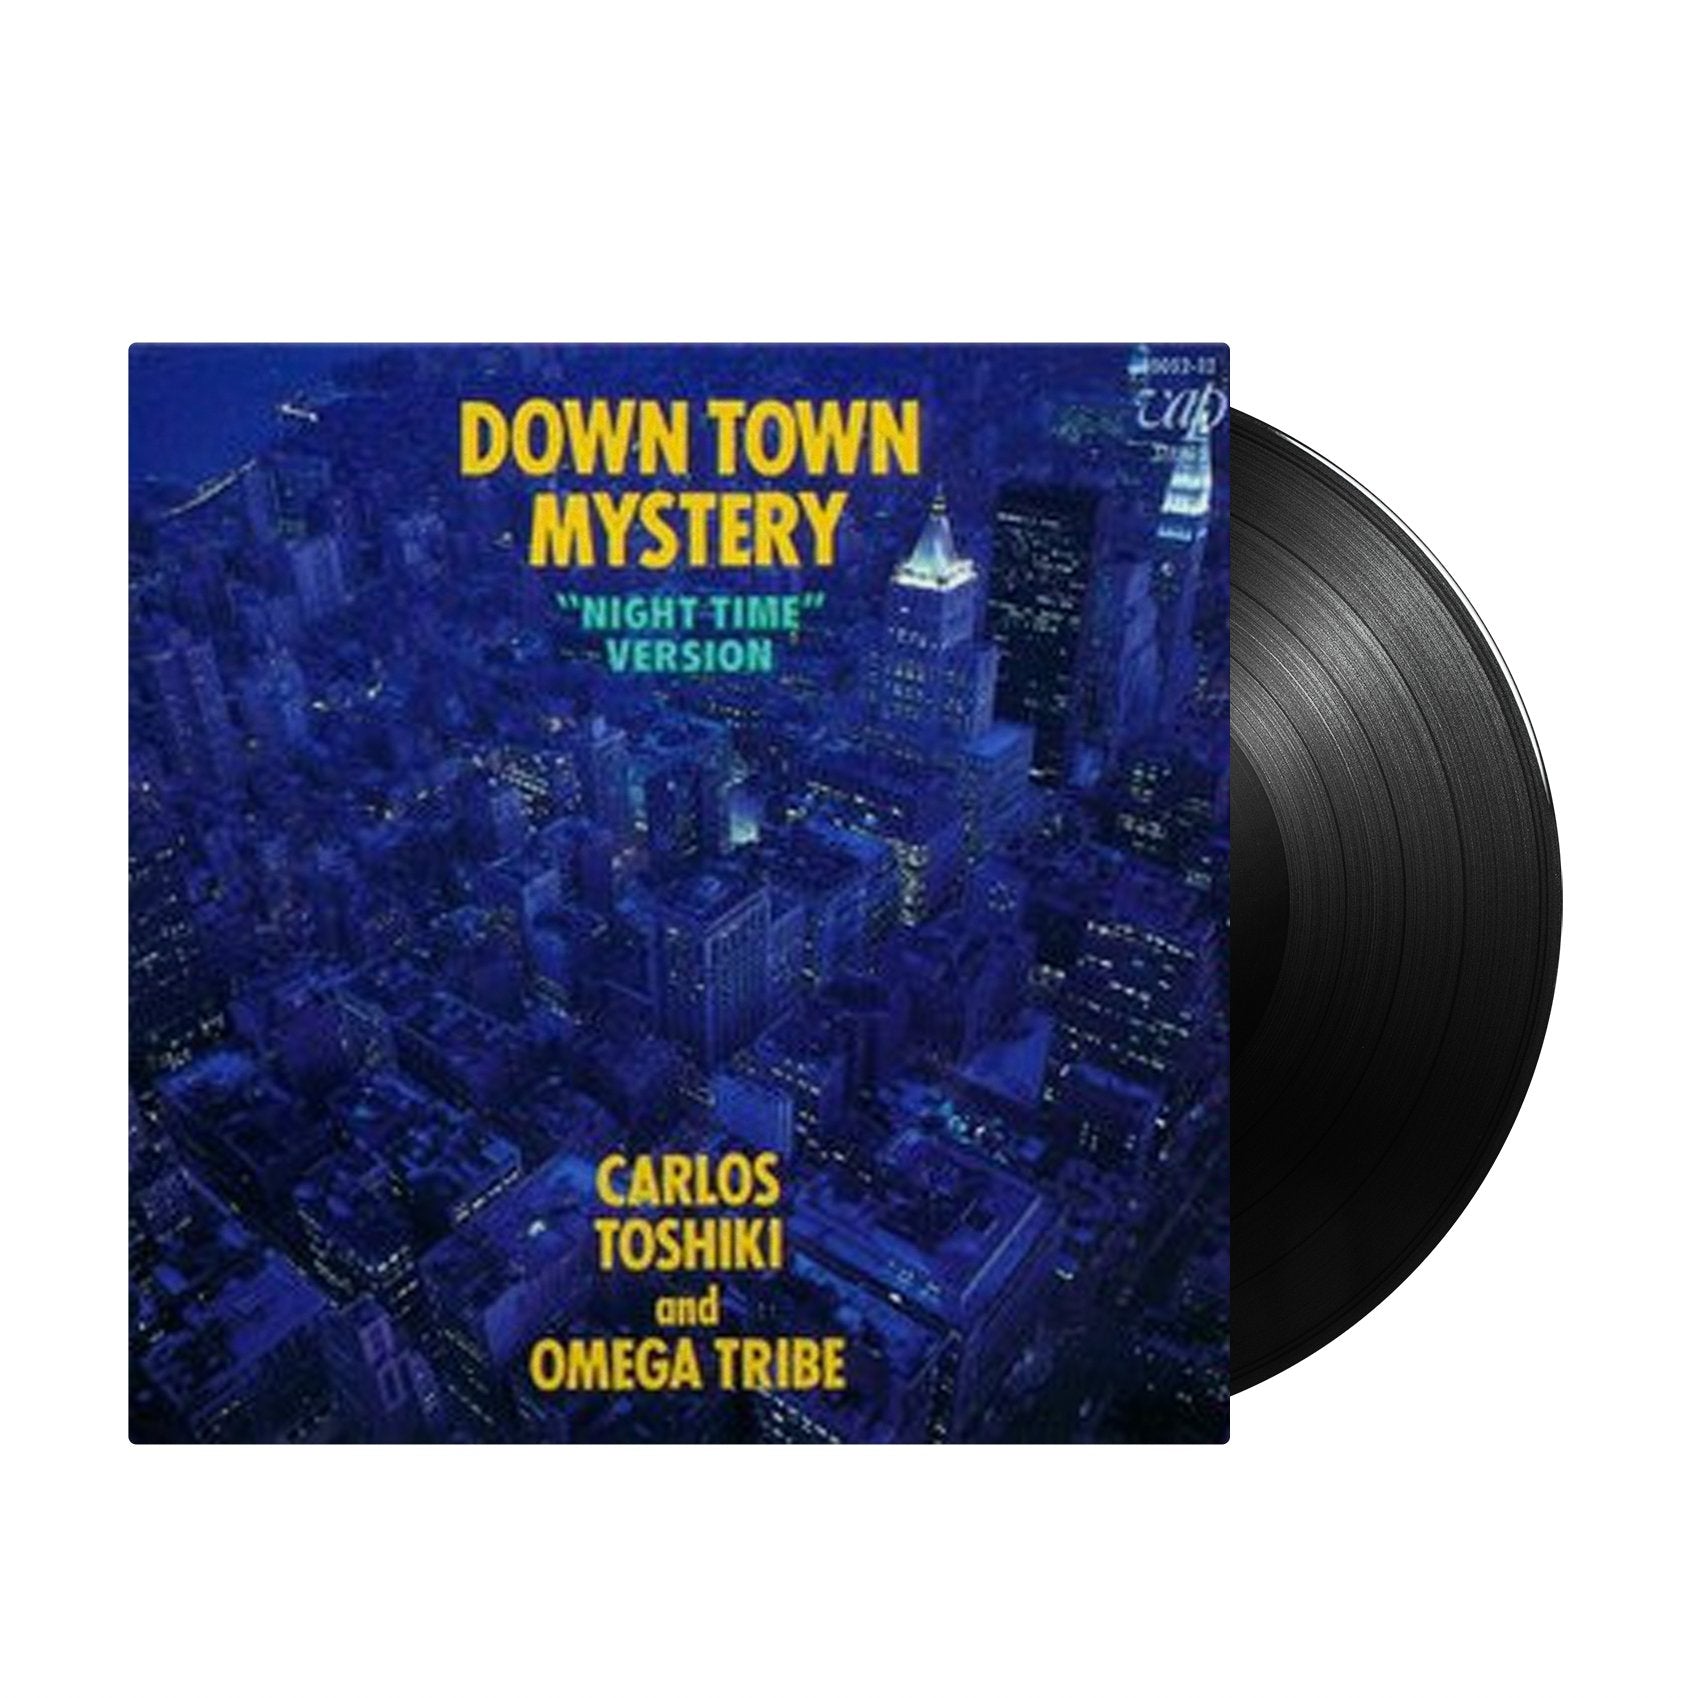 Carlos Toshiki & Omega Tribe - Down Town Mystery ("Night Time" Version) (Japan Import) - Inner Ocean Records